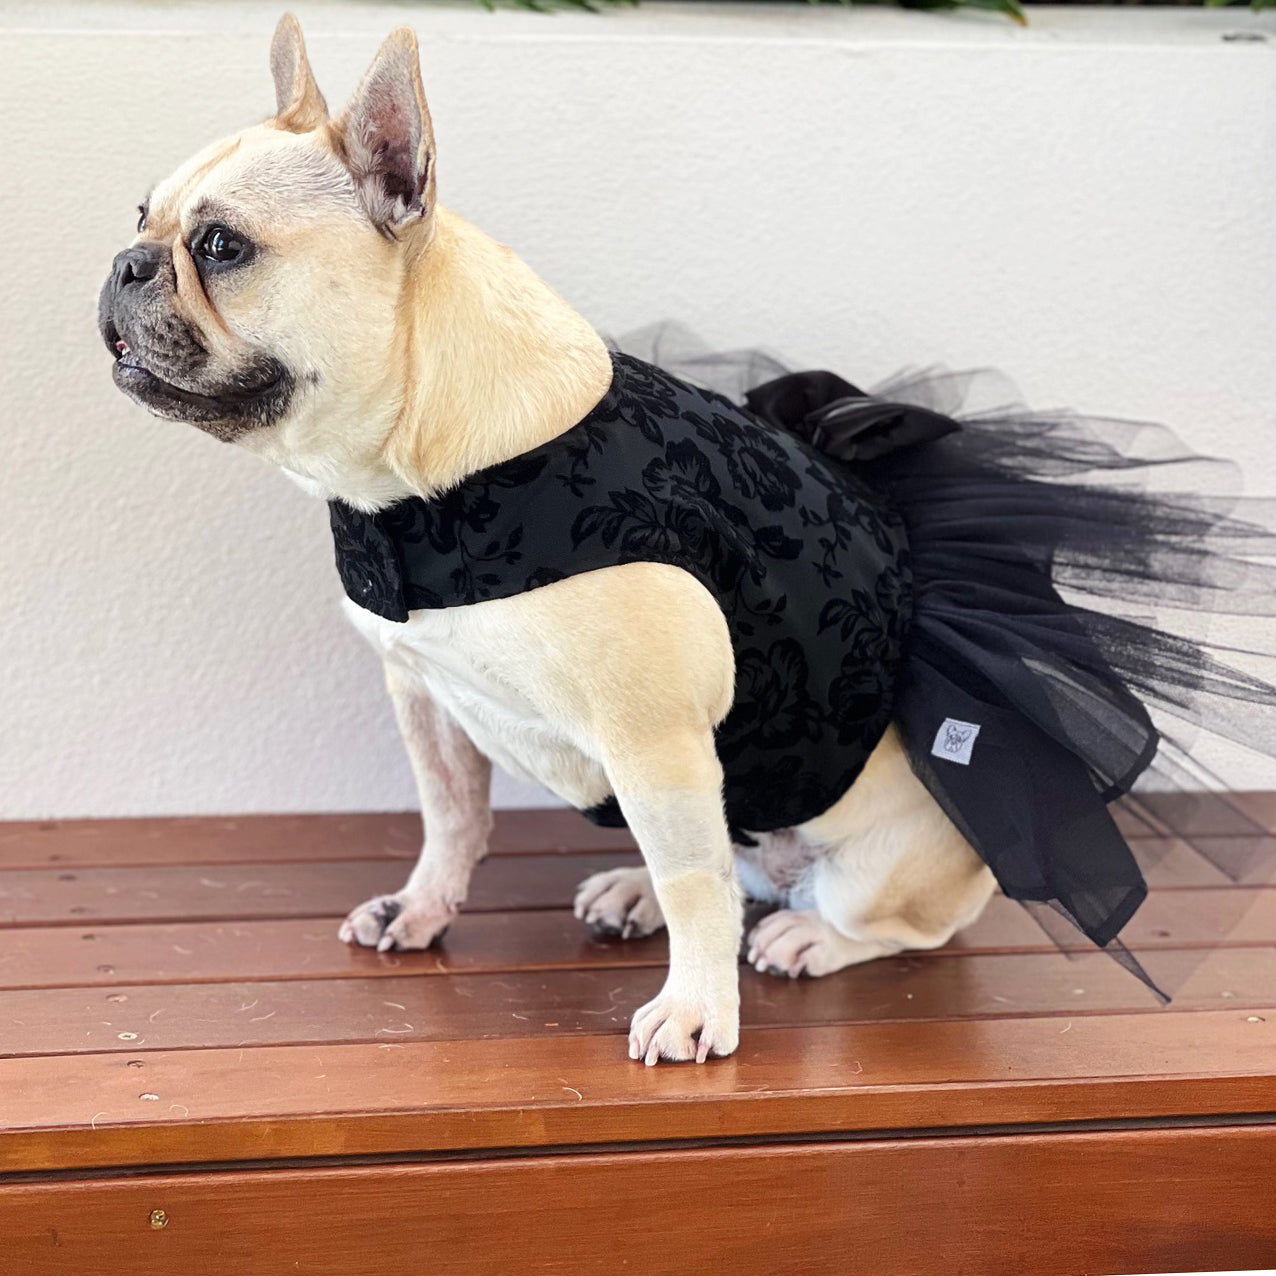 Black Mariah with Ruffles (with Tule & organza bow) Dog Dress (Limited Edition)